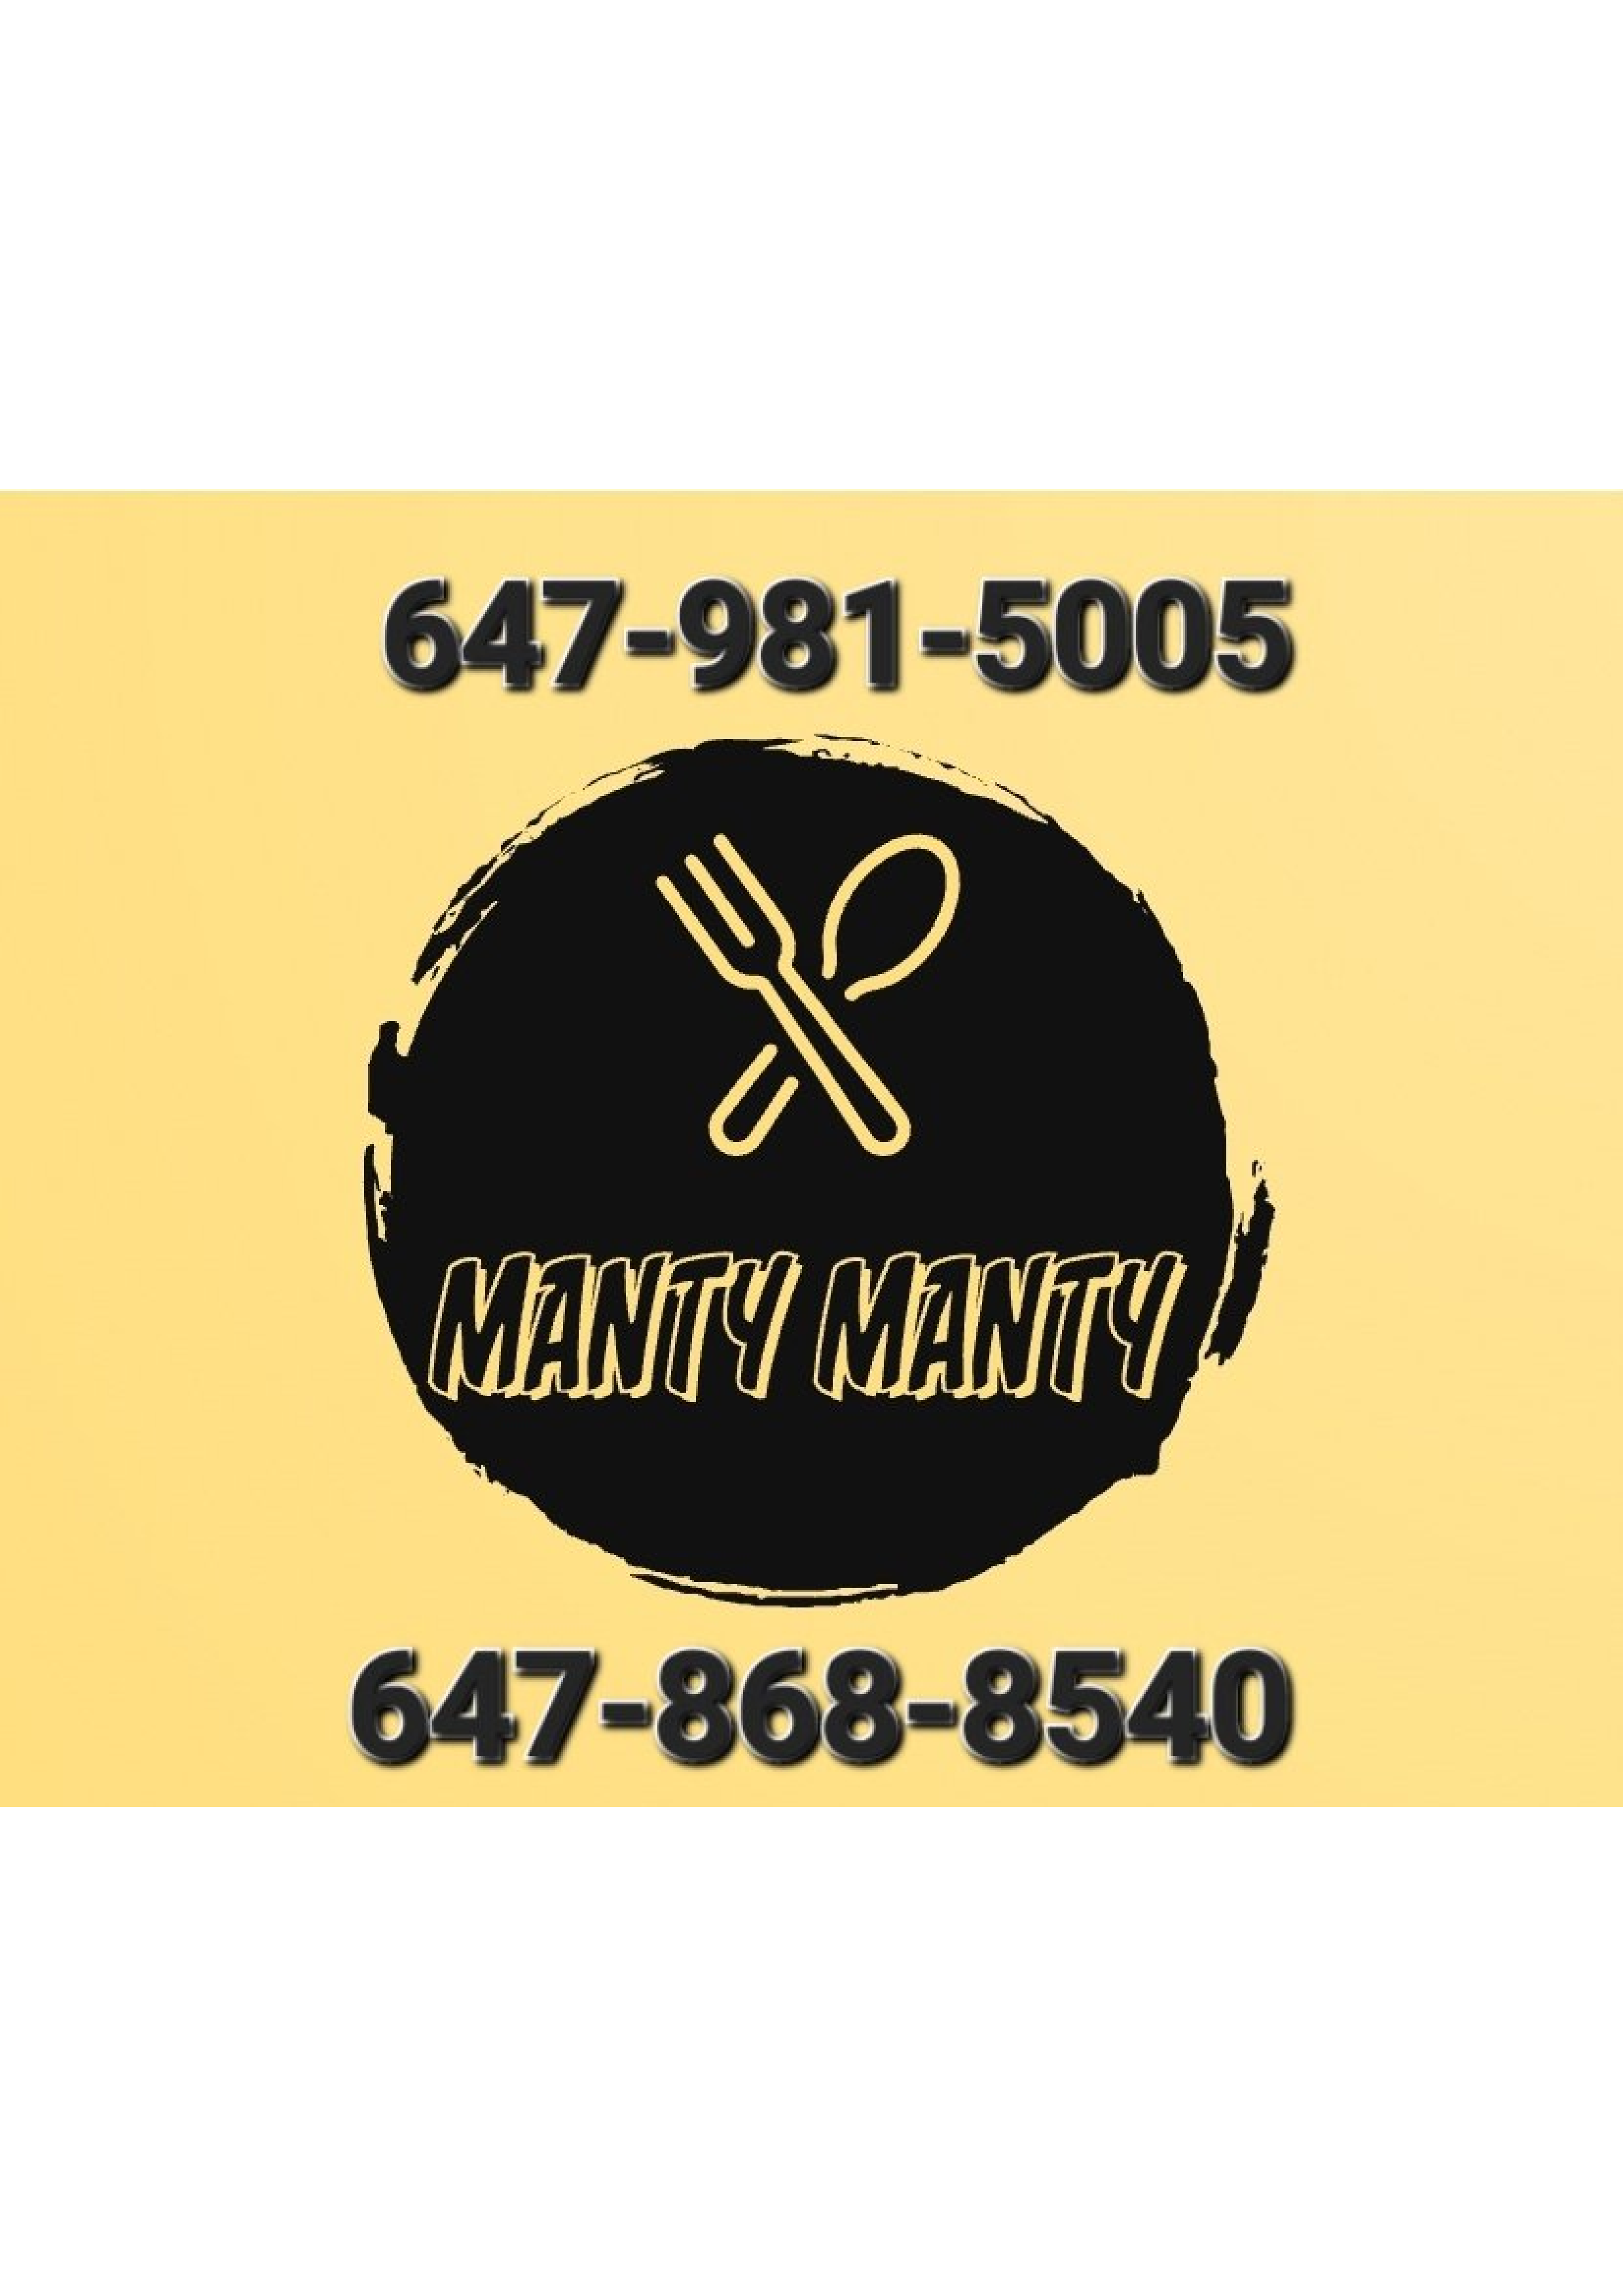 Manty Manty Catering